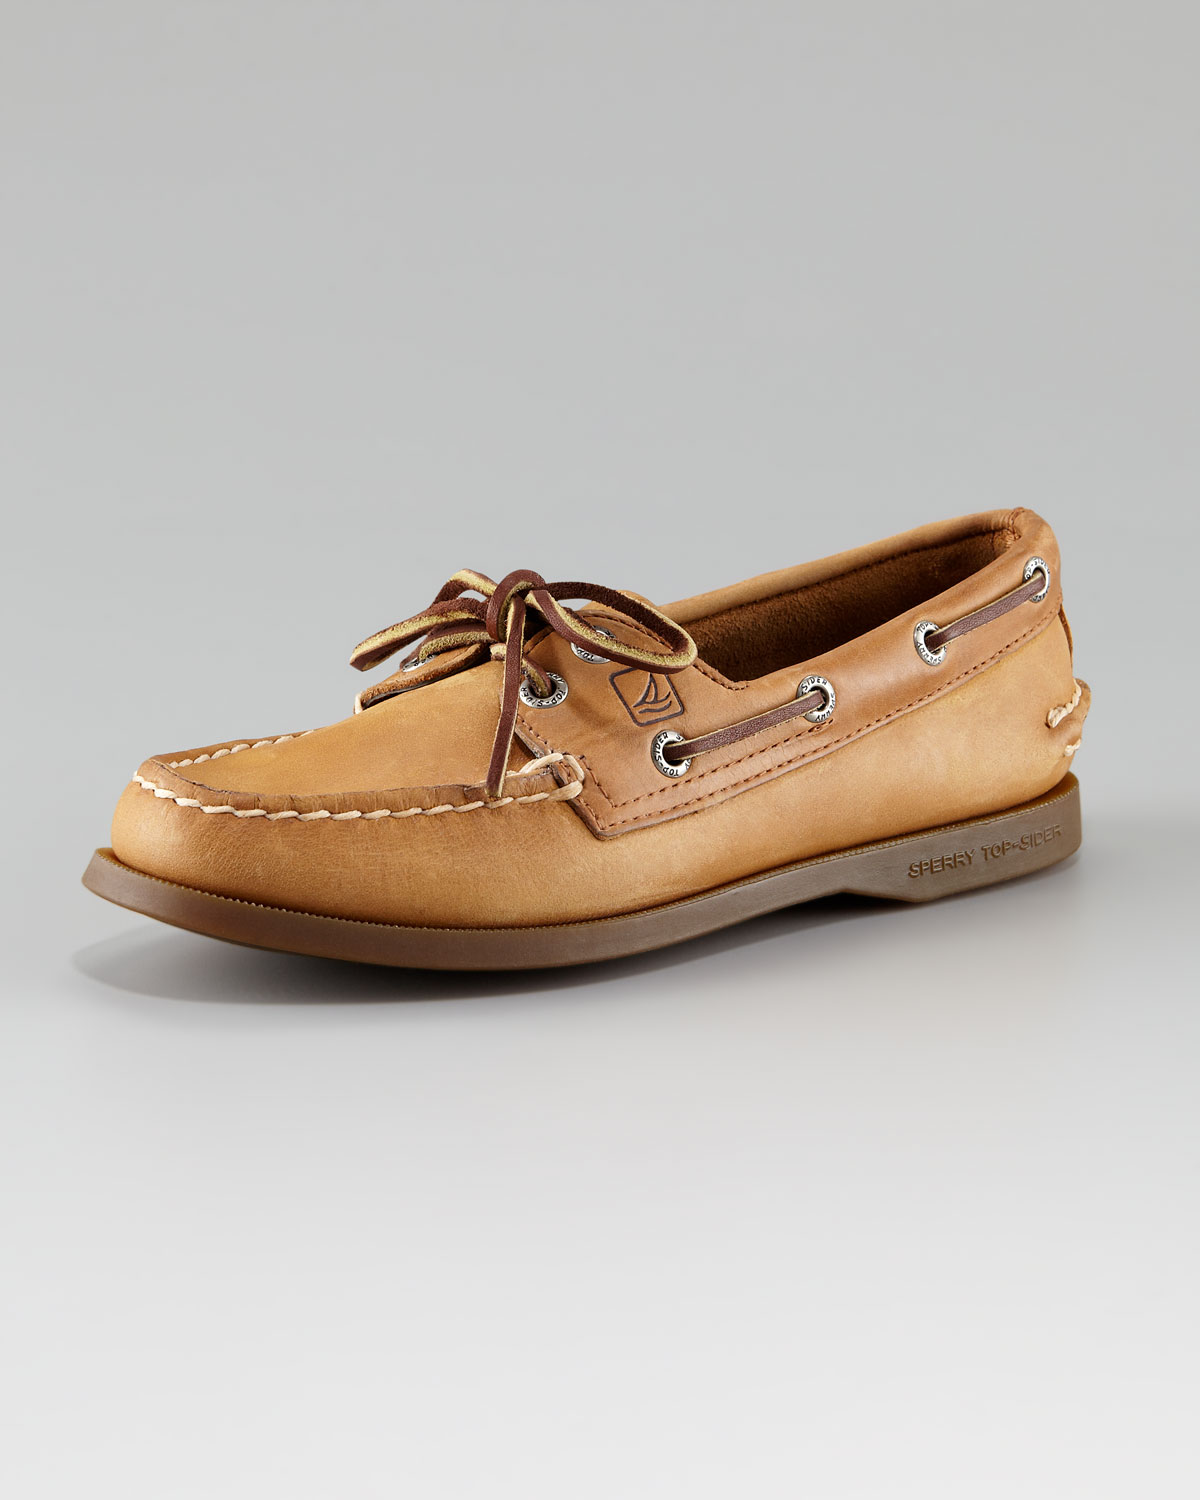 Lyst - Sperry Top-Sider Authentic Nubuck Boat Shoe in Brown